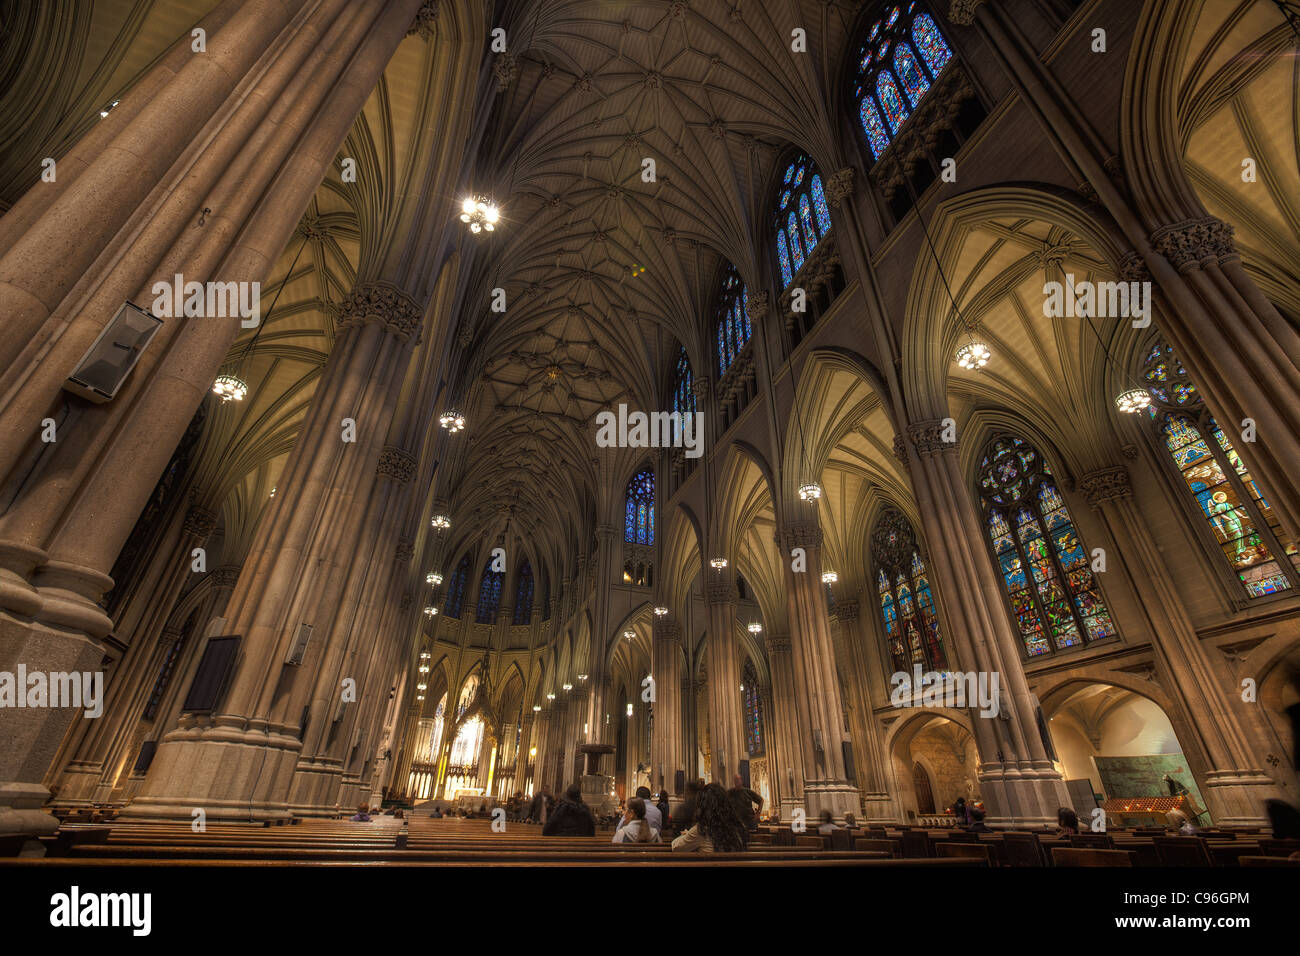 Interior of St. Patrick's Cathedral, New York City Stock Photo